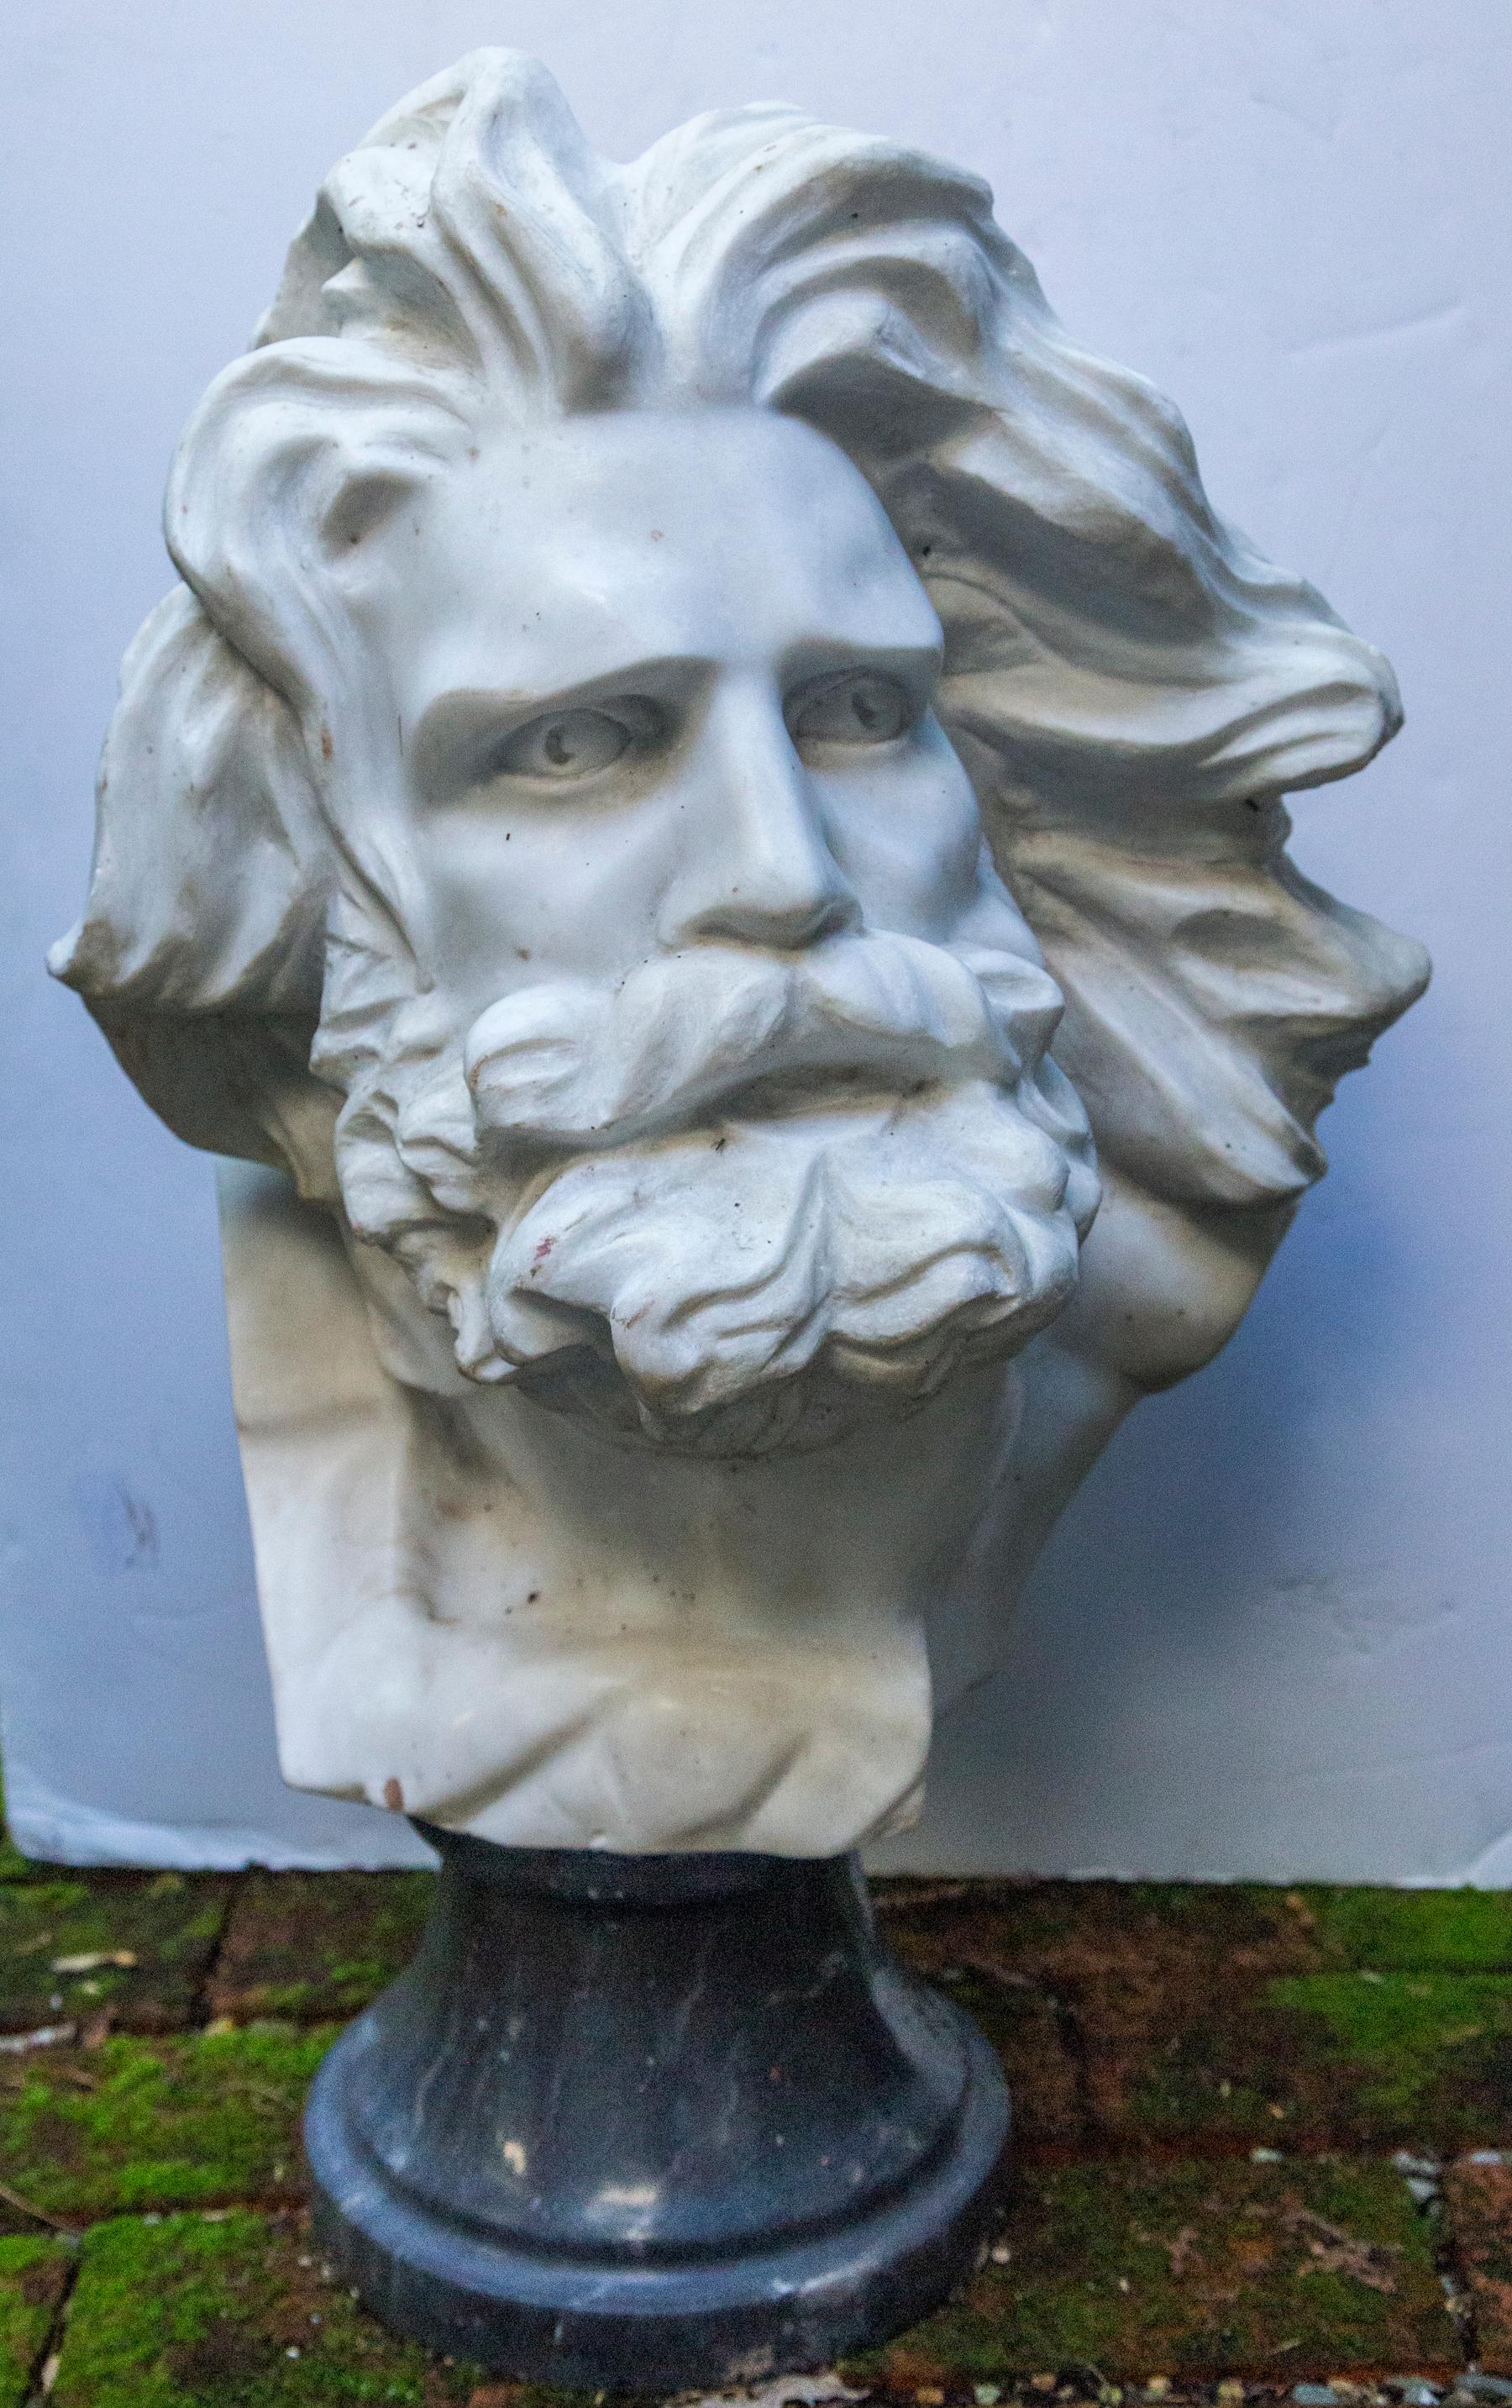 Raised on a dark gray marble socle it is 25 inches tall. The socle has a 9 inch diameter
The dimensions below are of the bust itself.
Perhaps he is a representation of Zeus or another of the Olympian gods of ancient Greece or their Roman